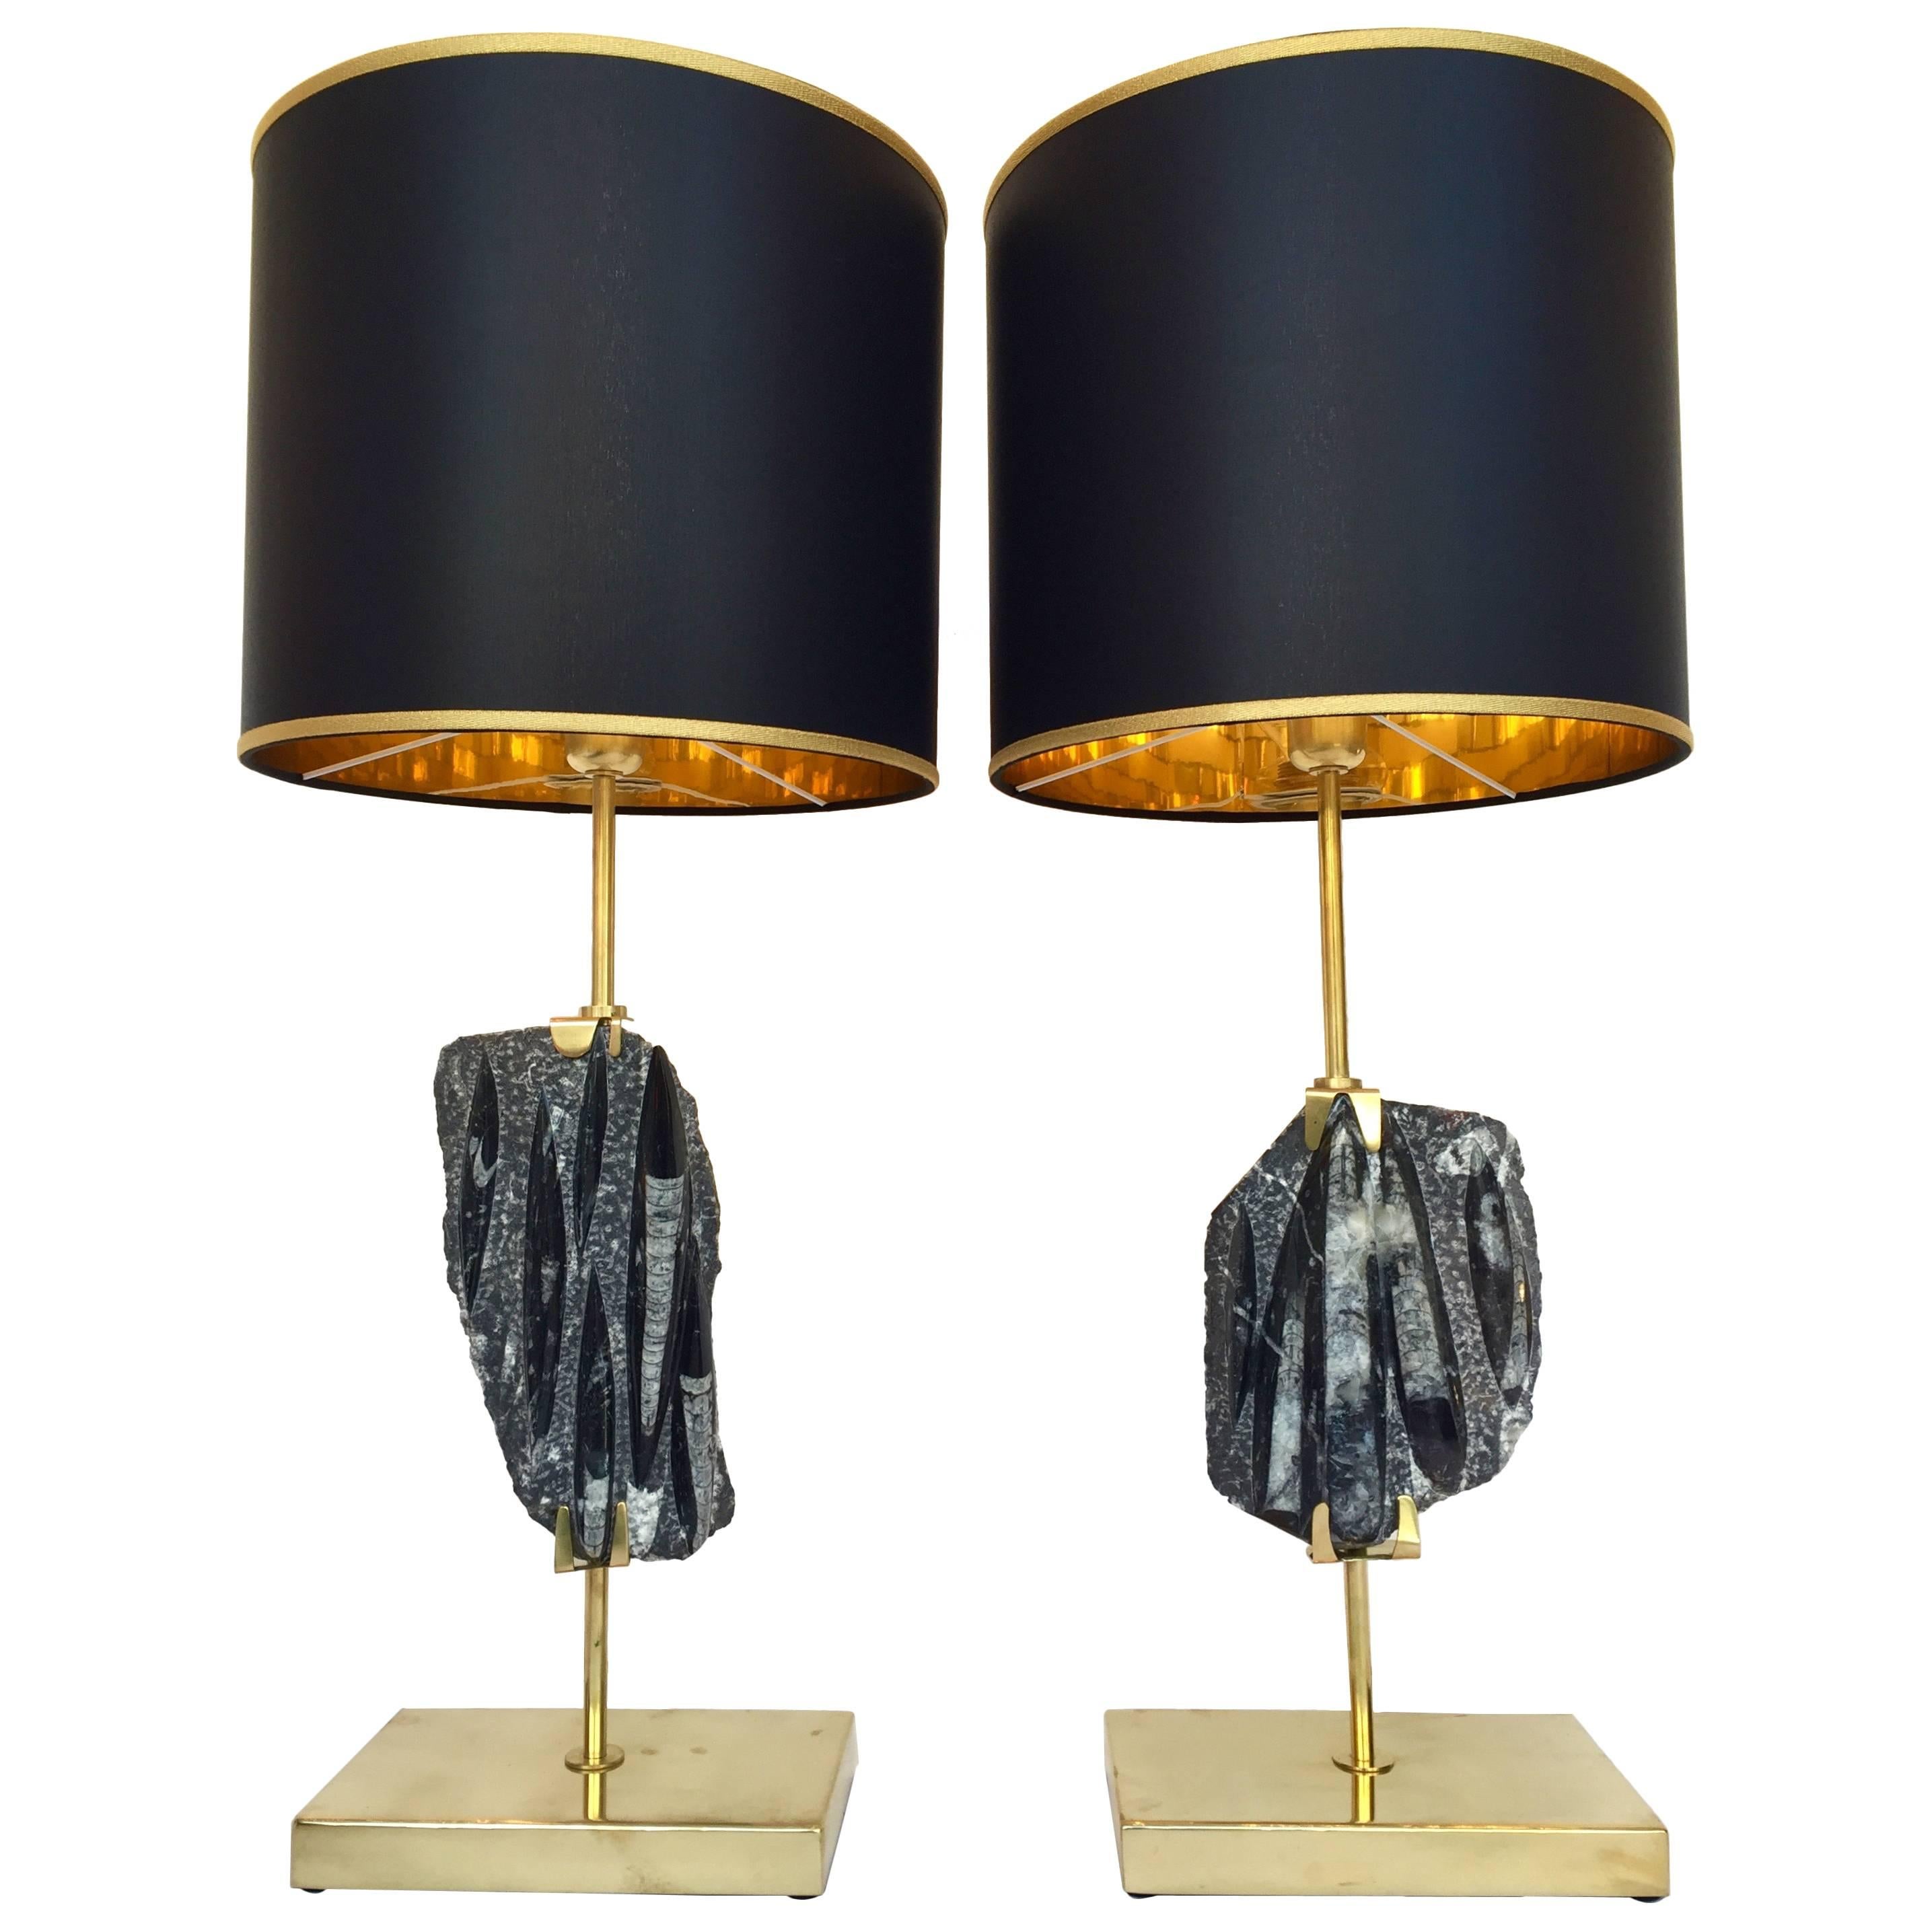 Pair of Lamps Orthoceras Fossil and Brass. Contemporary. Italy. 2016